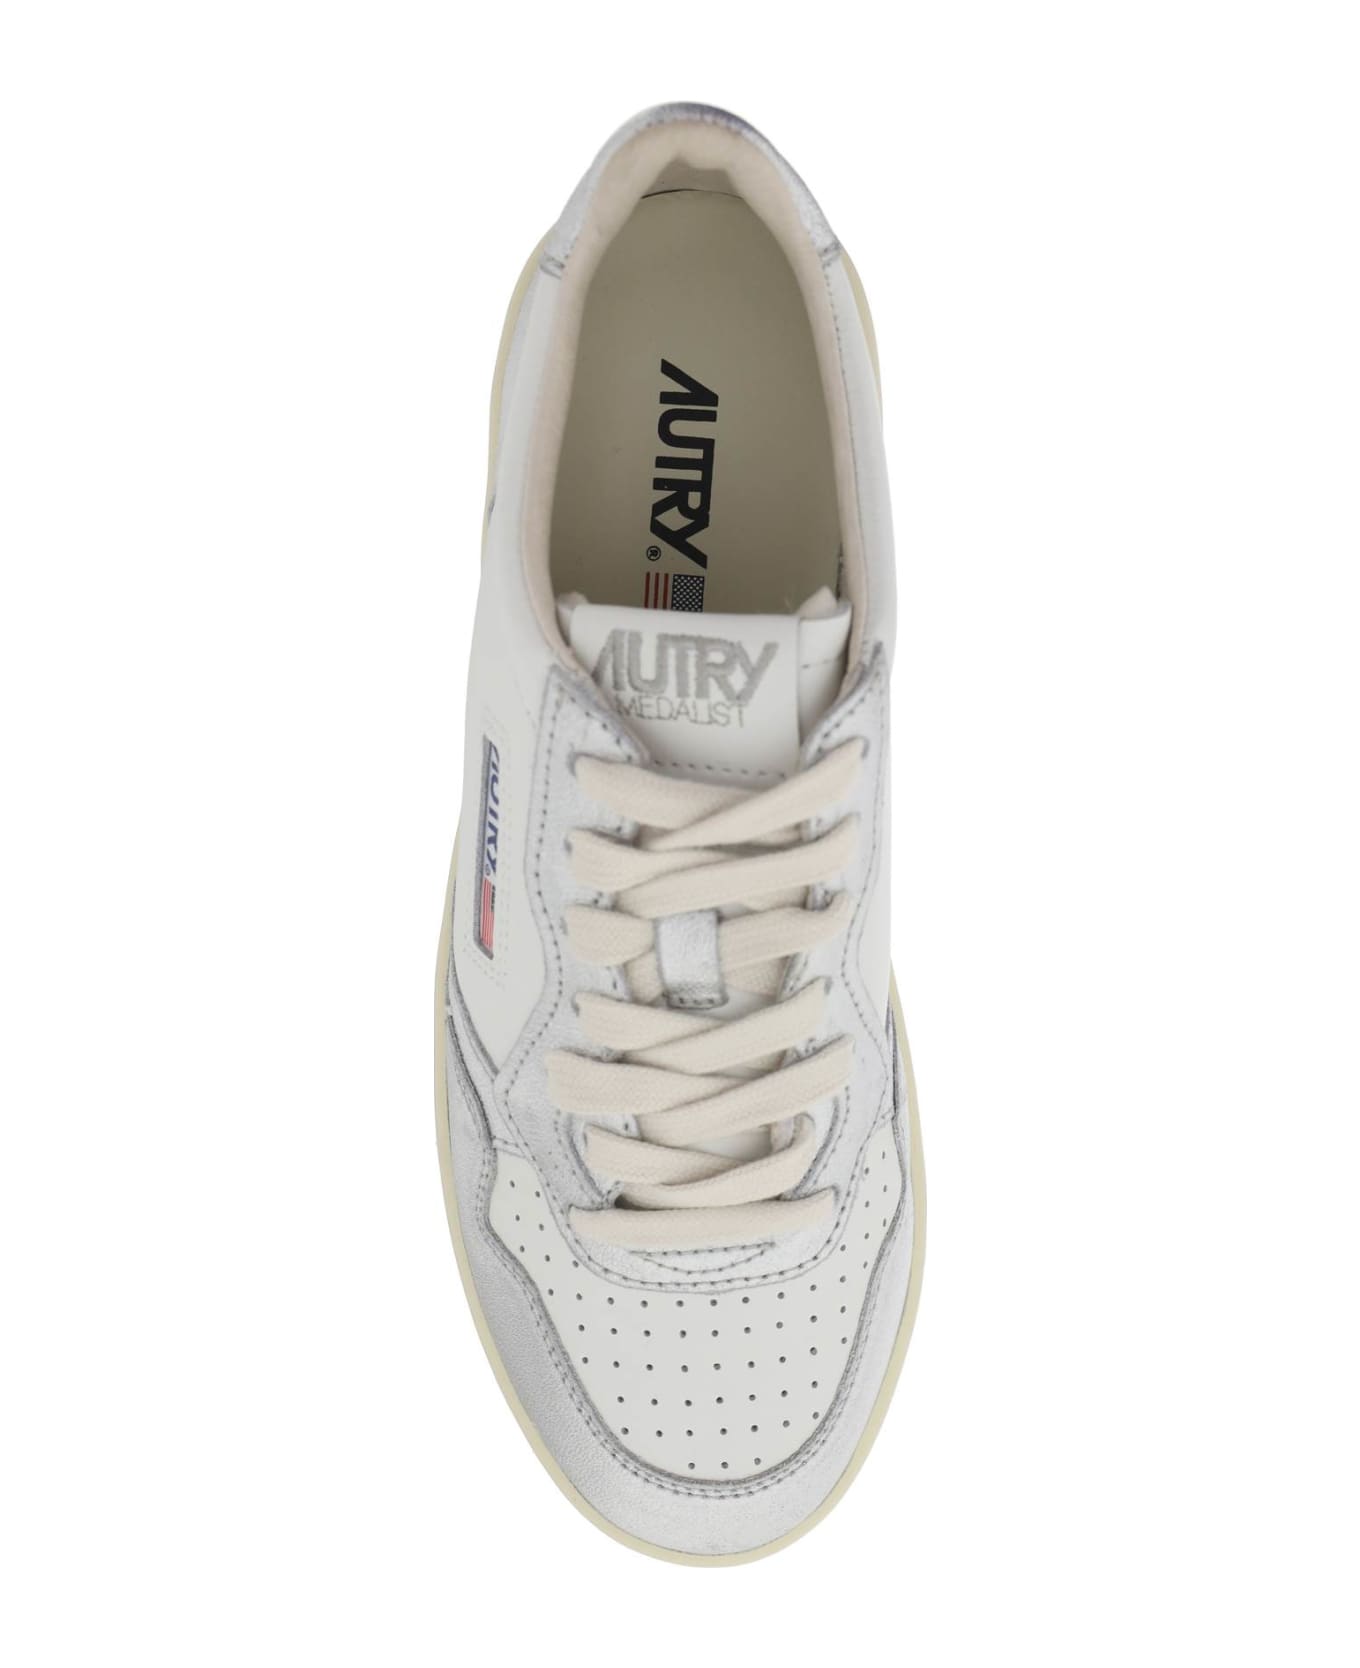 Autry Medalist Low Sneakers - WHITE SILVER (Silver)